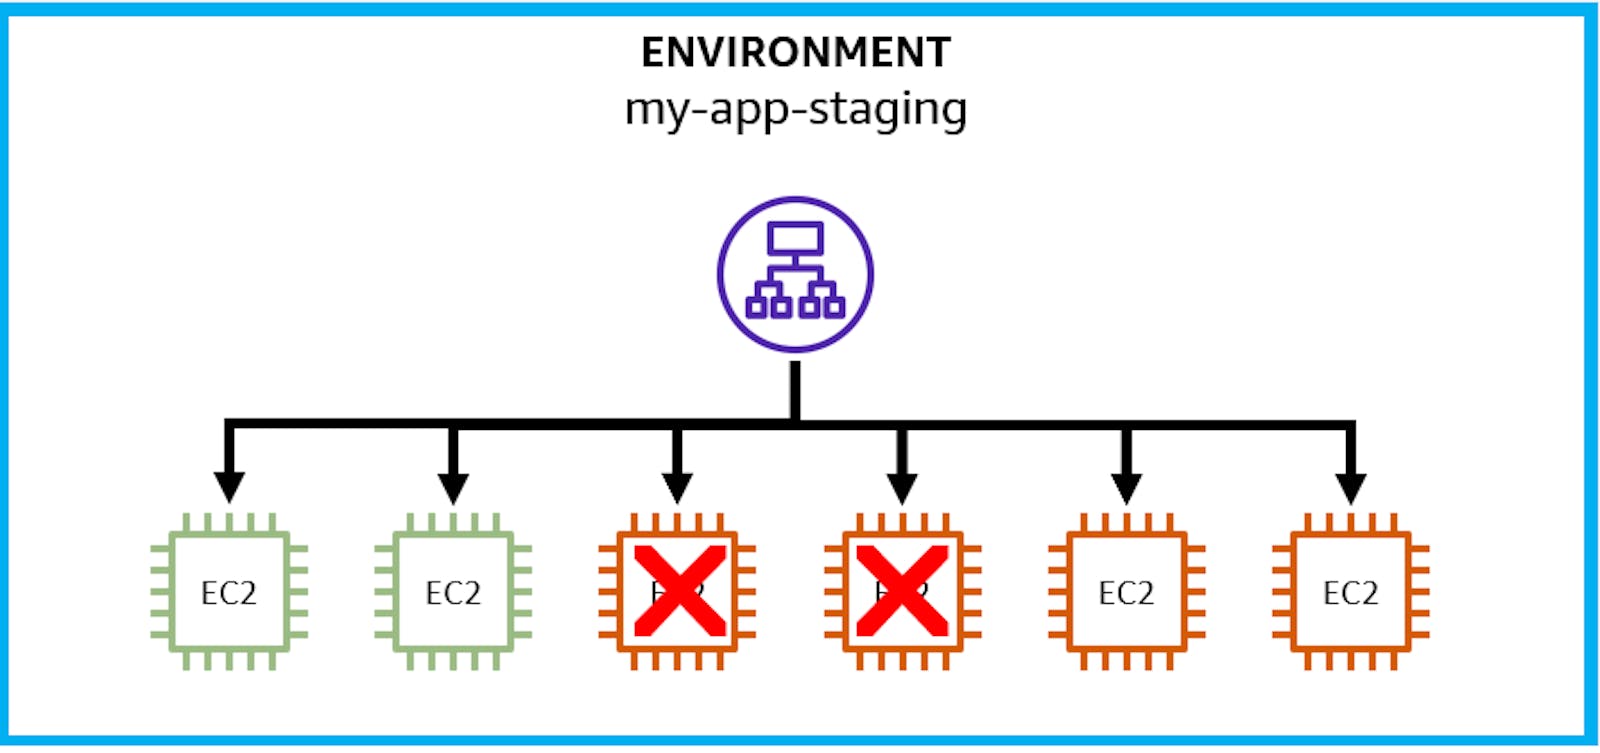 Deploy Apps Your Way with Elastic Beanstalk